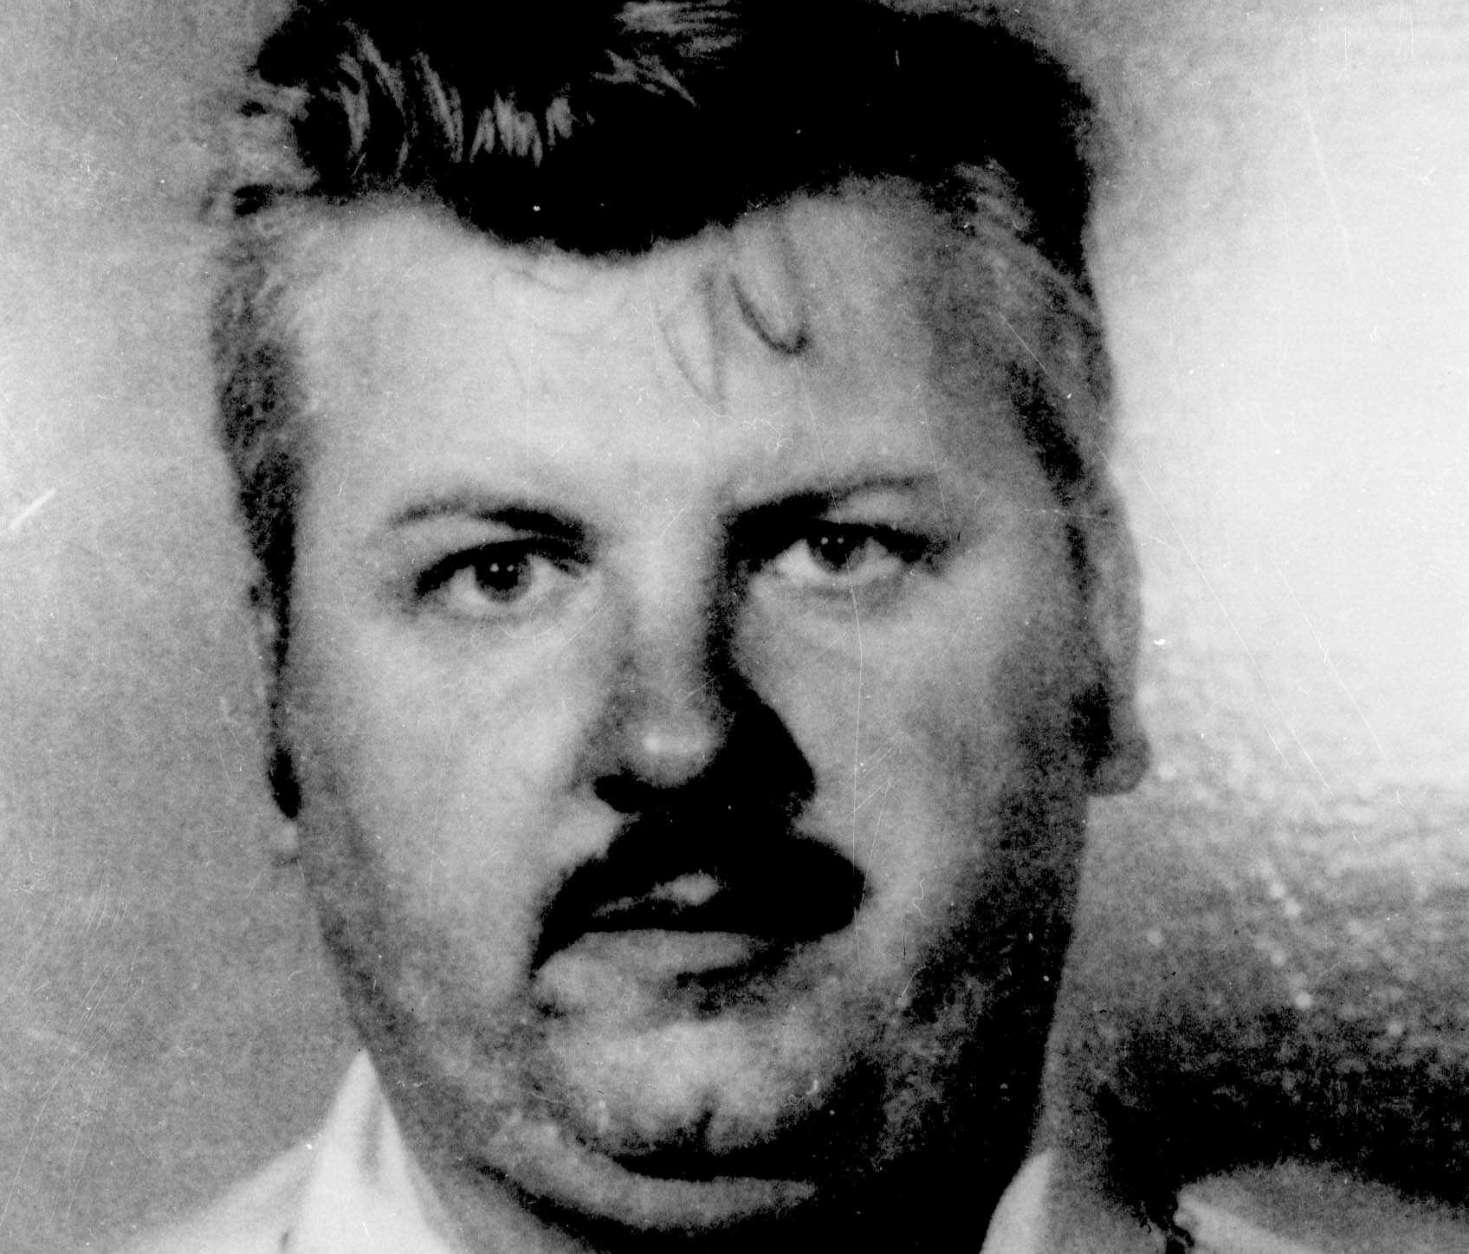 FILE - This 1978 file photo shows serial killer John Wayne Gacy. Detectives who have long wondered if Gacy killed others besides the 33 young men he was convicted of murdering may soon get to search for bodies underneath an apartment complex where his late mother once lived, a law enforcement official said Saturday, Jan. 12, 2013. (AP Photo/File)